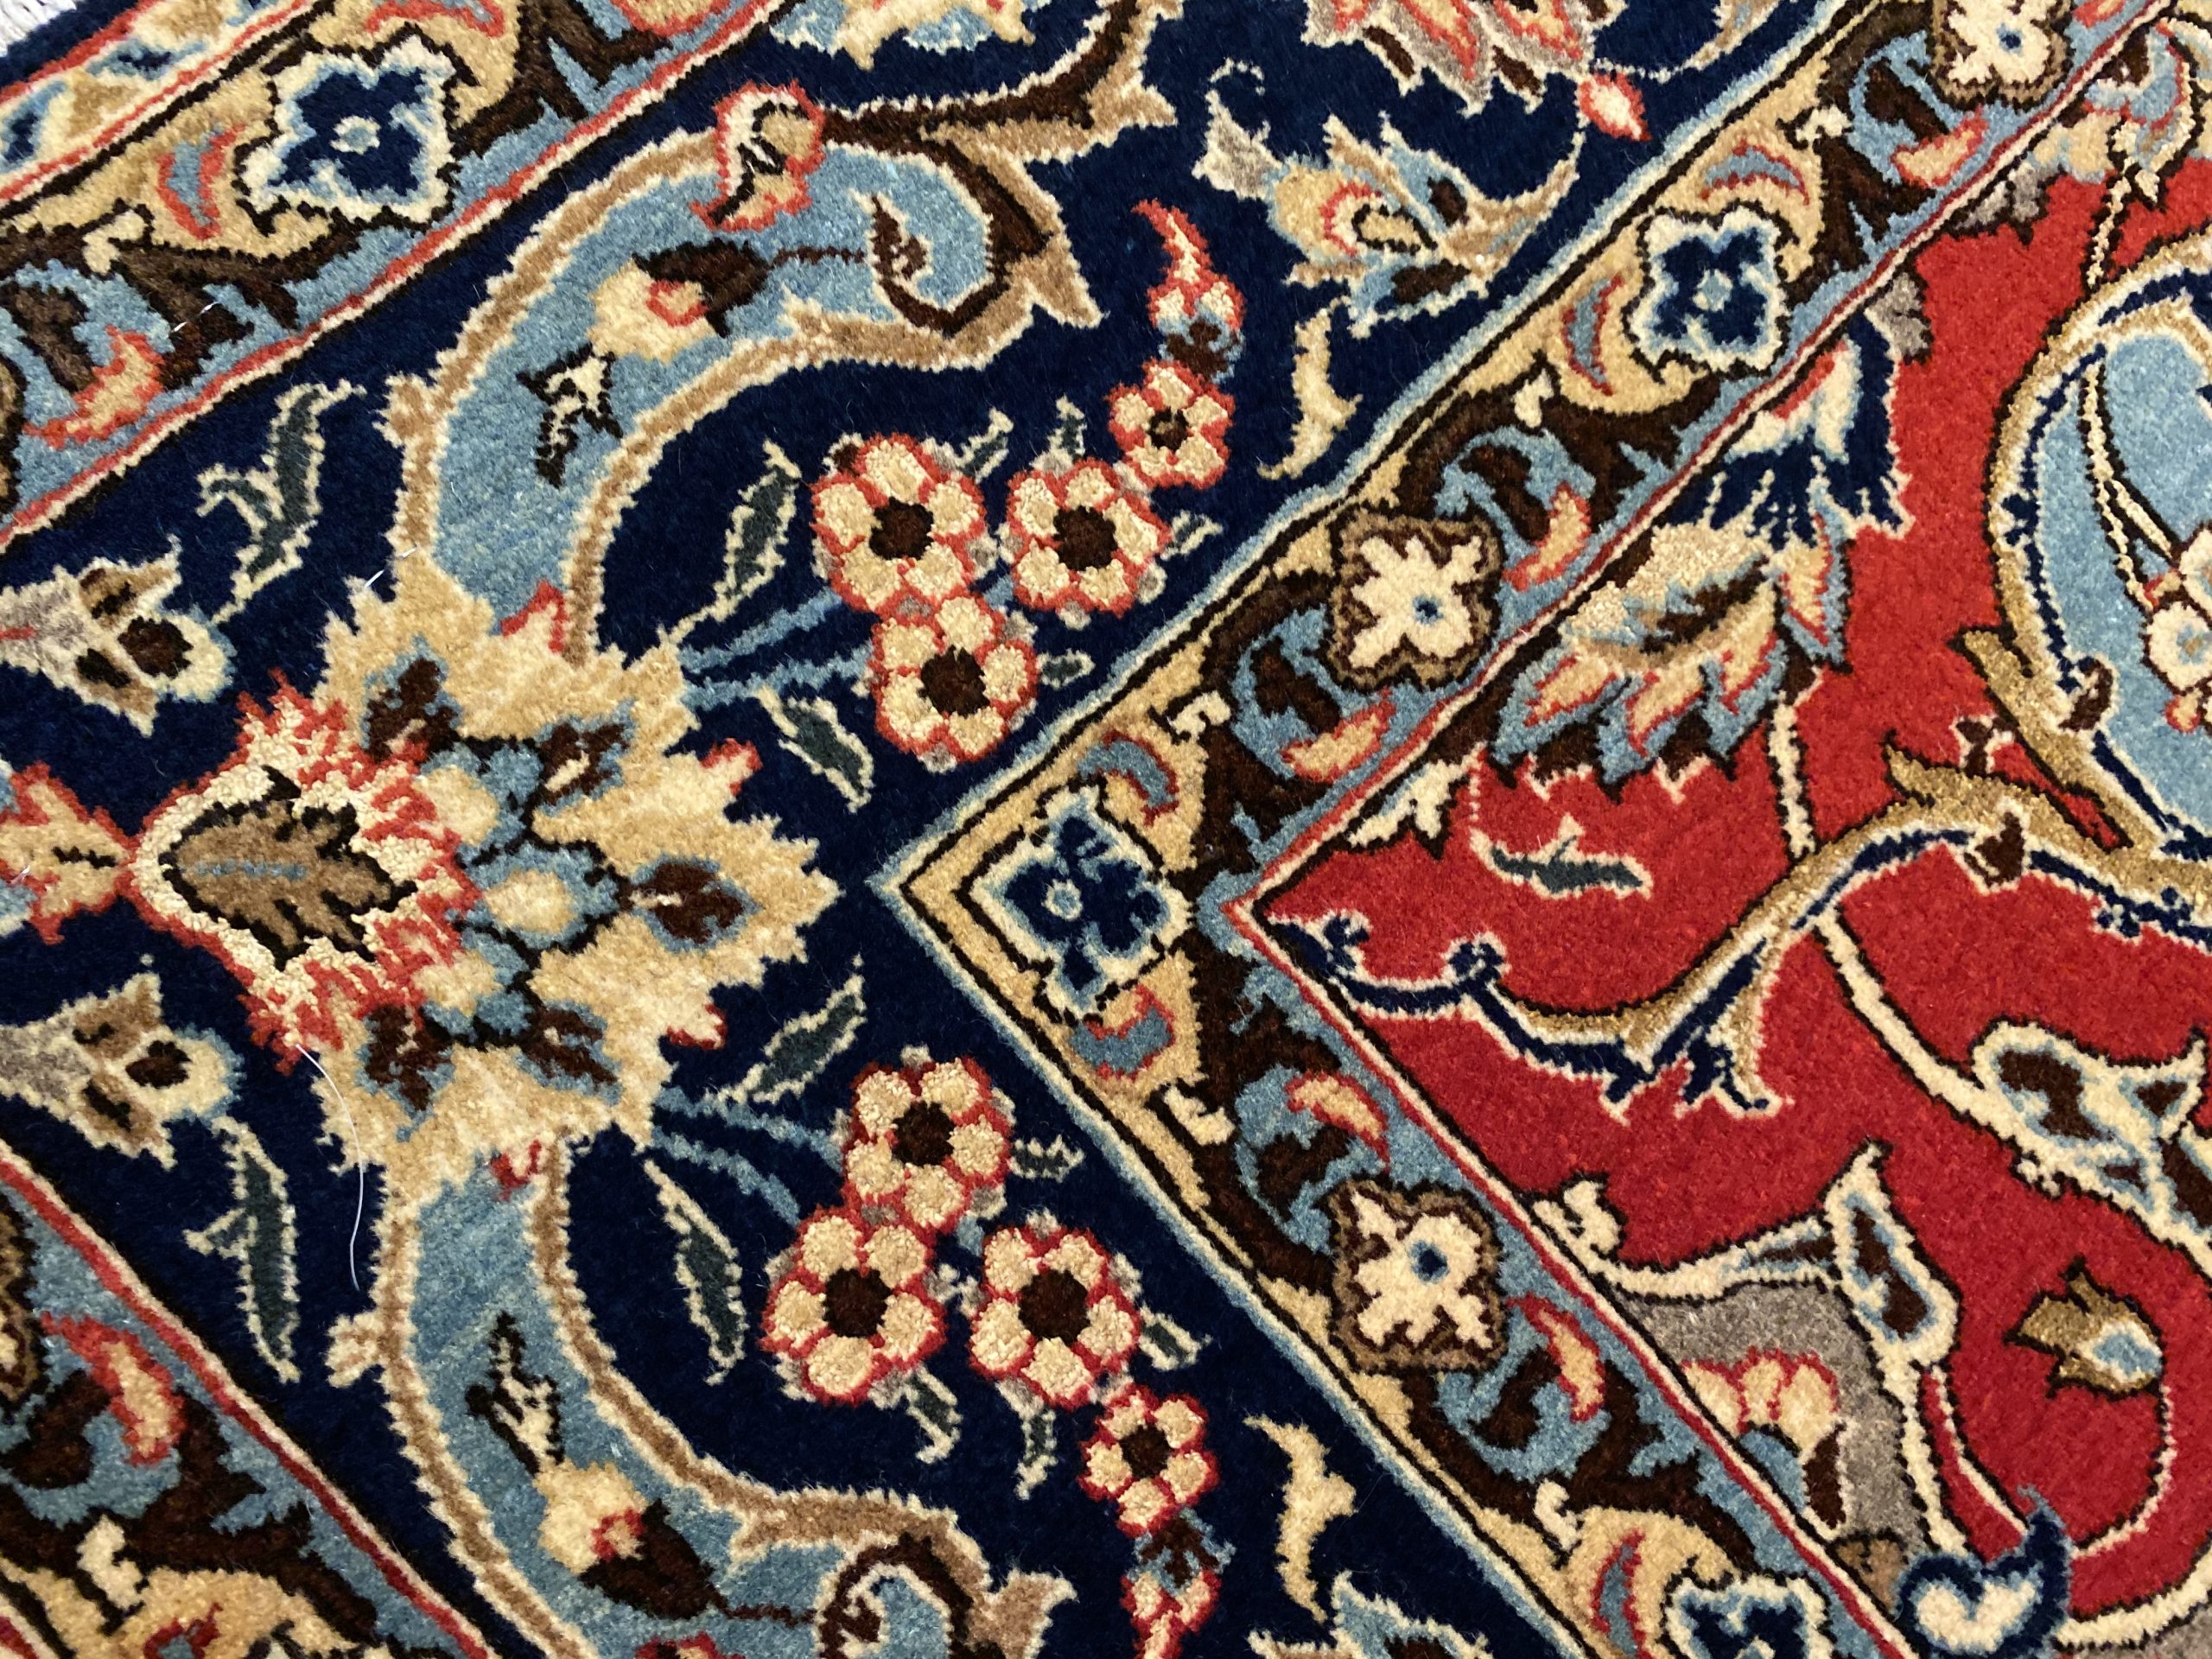 Rug# 5852, vintage Qum wool pile, circa 1945, silk inlay, immaculate, Persia, size 210x140 cm, RRP $8000 , on special $3000 (7)